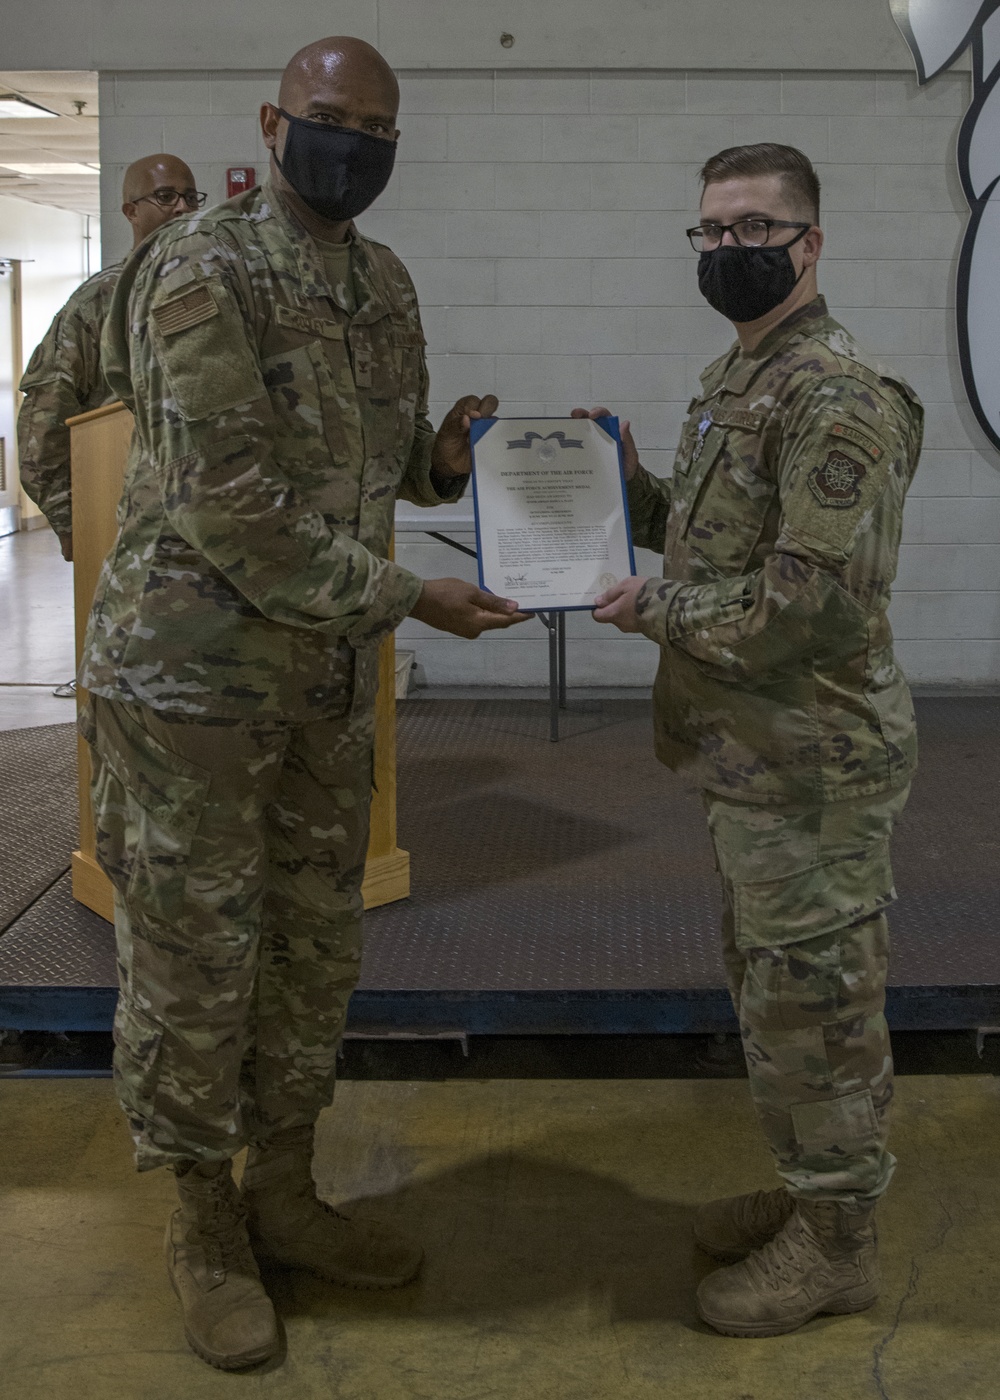 JBA Port Dawgs awarded AFAM for aiding ARNG during D.C. protests